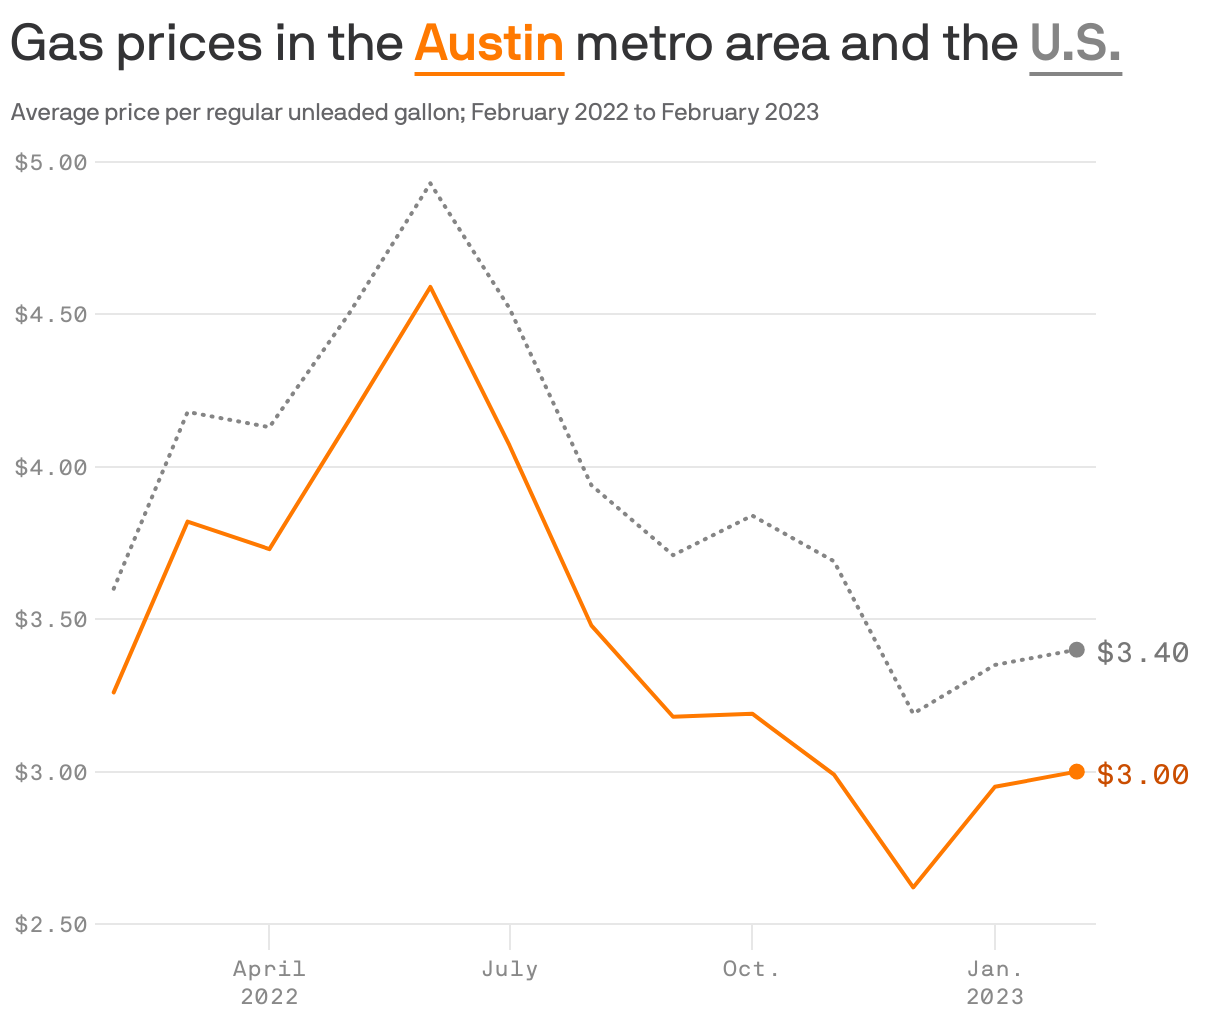 Gas prices in the <b style='text-decoration: underline; text-underline-position: under; color: #ff7900;'>Austin</b> metro area and the <b style='text-decoration: underline; text-underline-position: under; color: #858585;'>U.S.</b>